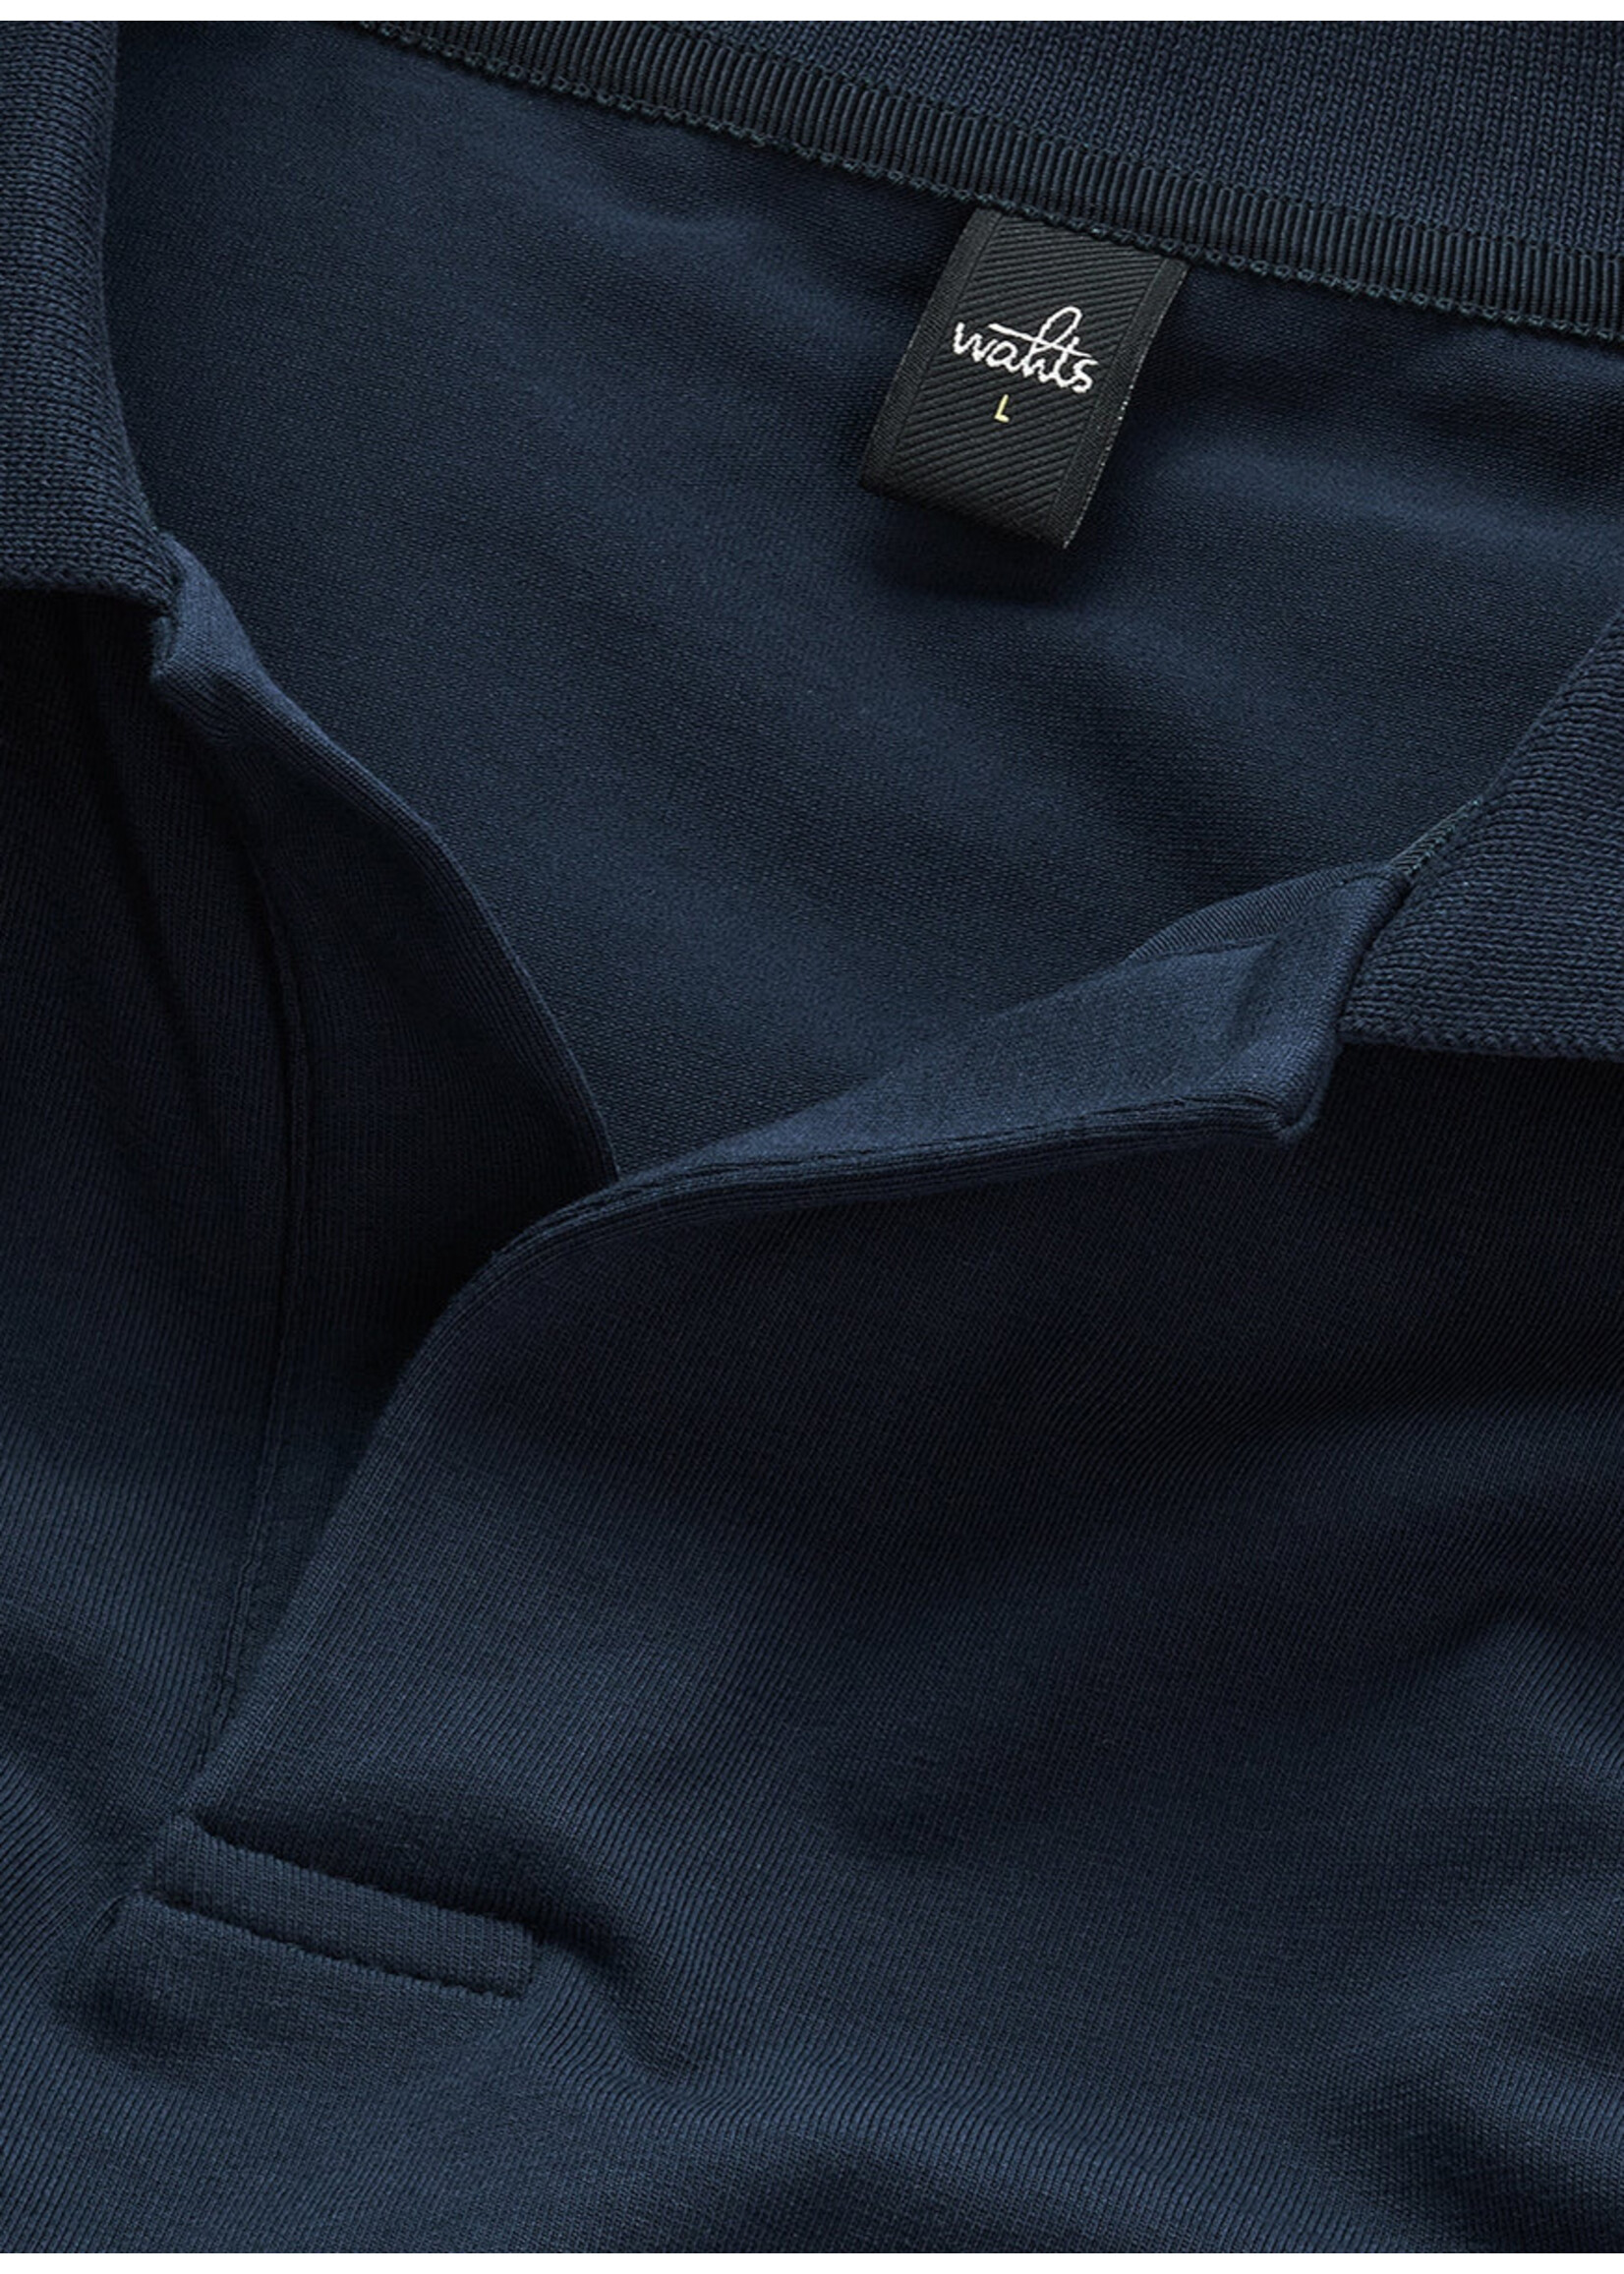 Wahts Hastings Tech Stretch Polo Navy Blue